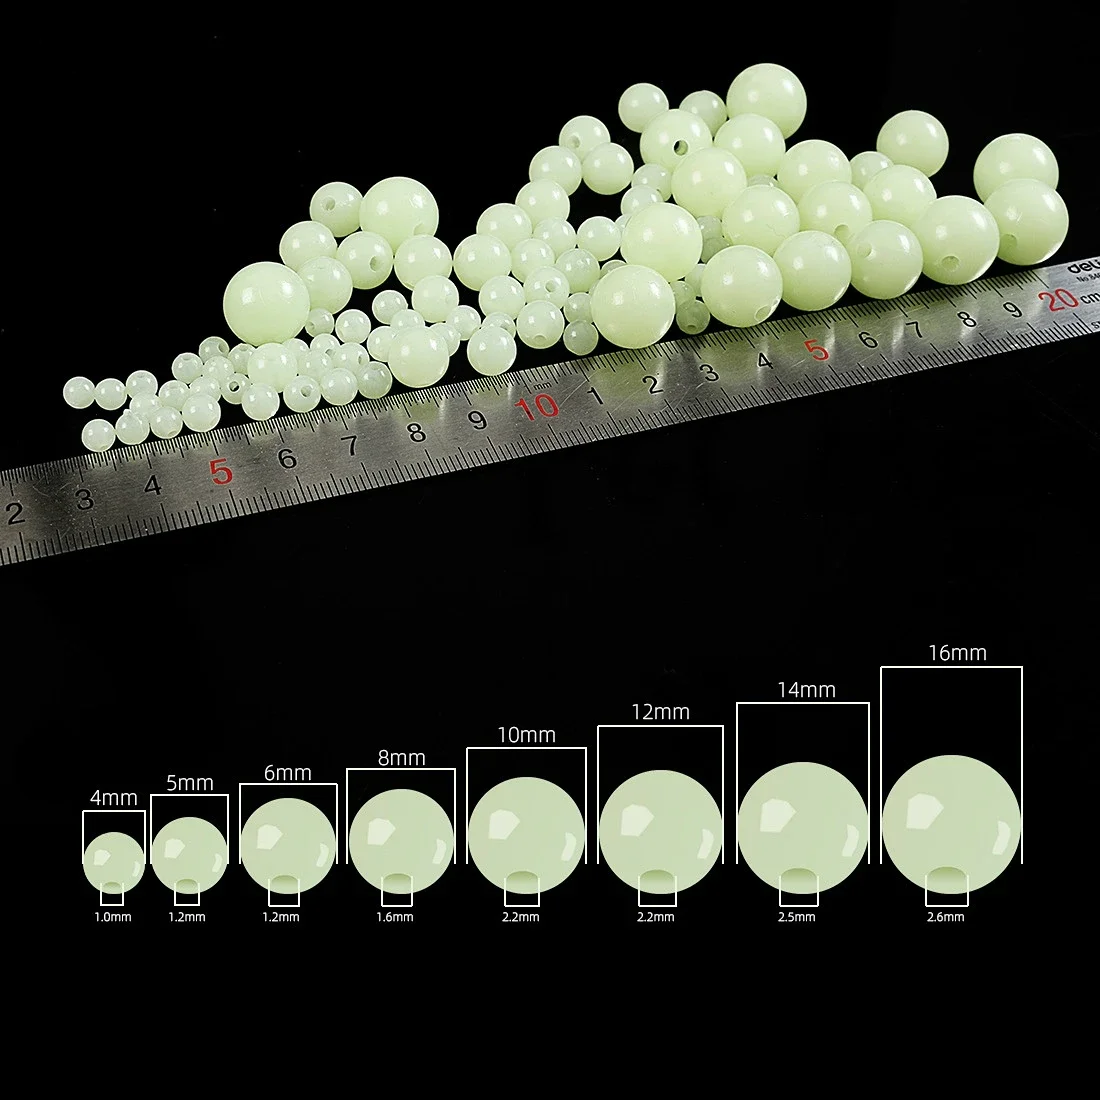 100pcs/Lot for Outdoor Fishing Accessories Set Luminous Beads 4mm-10mm  Fishing Space Beans Round Float Balls Light Glowing